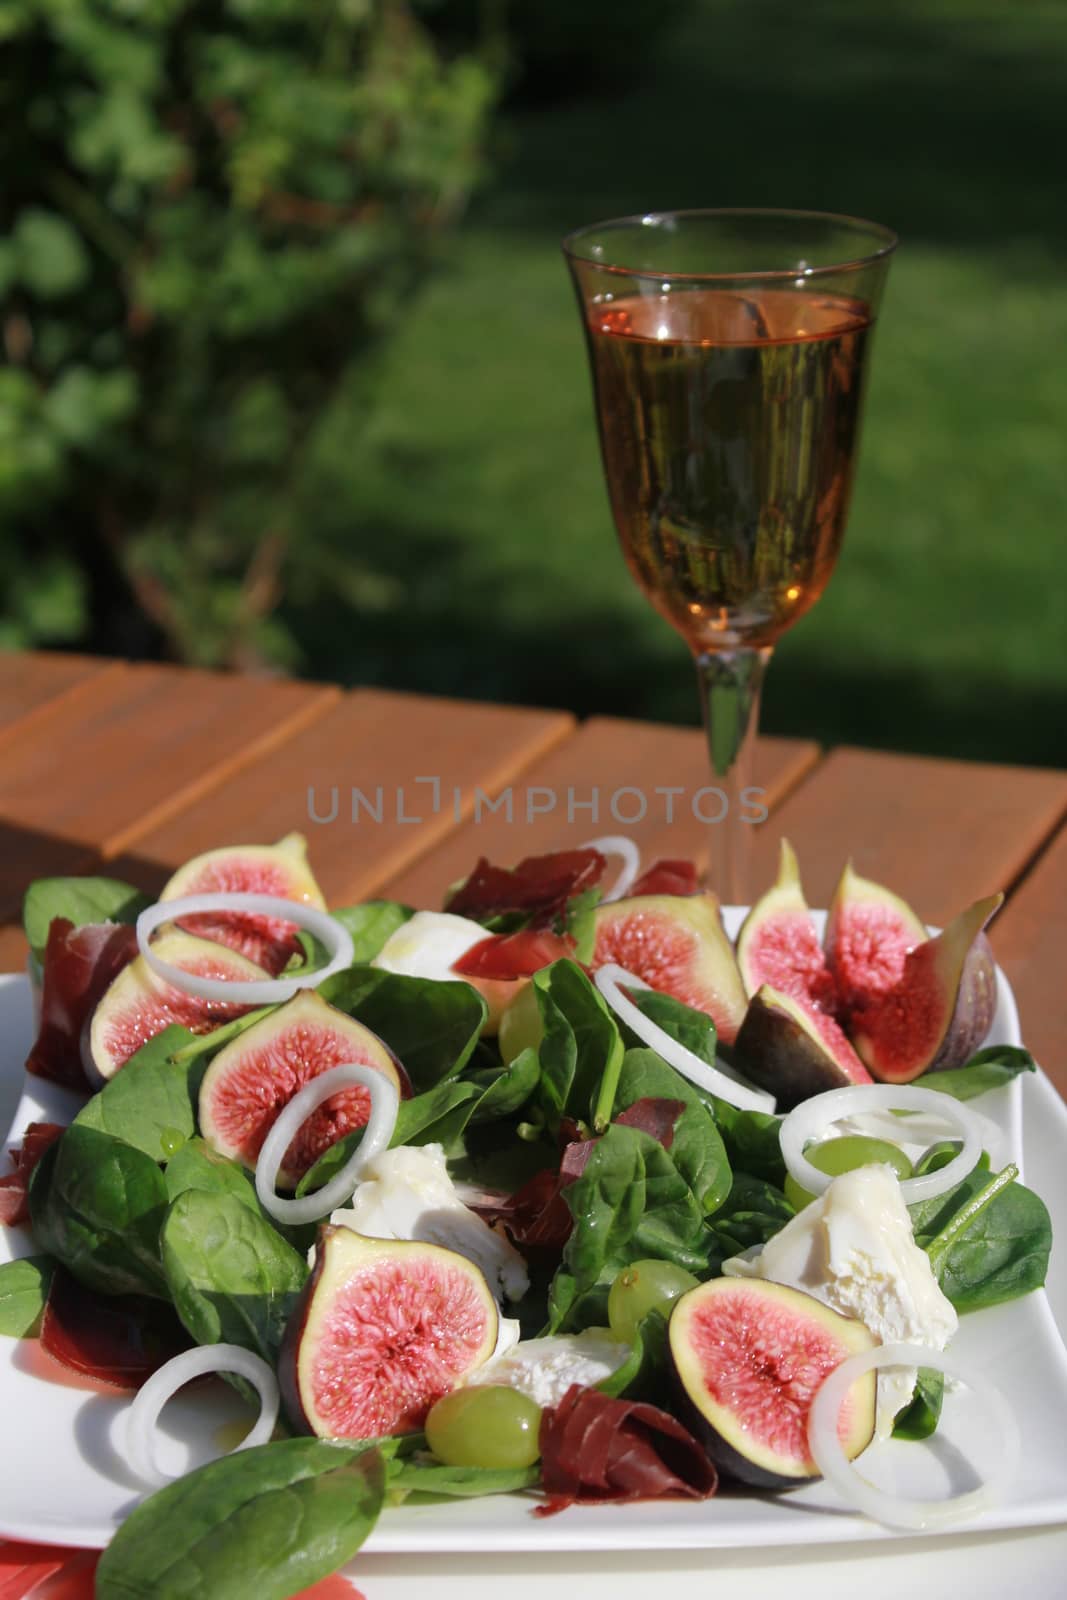 Salad with figs